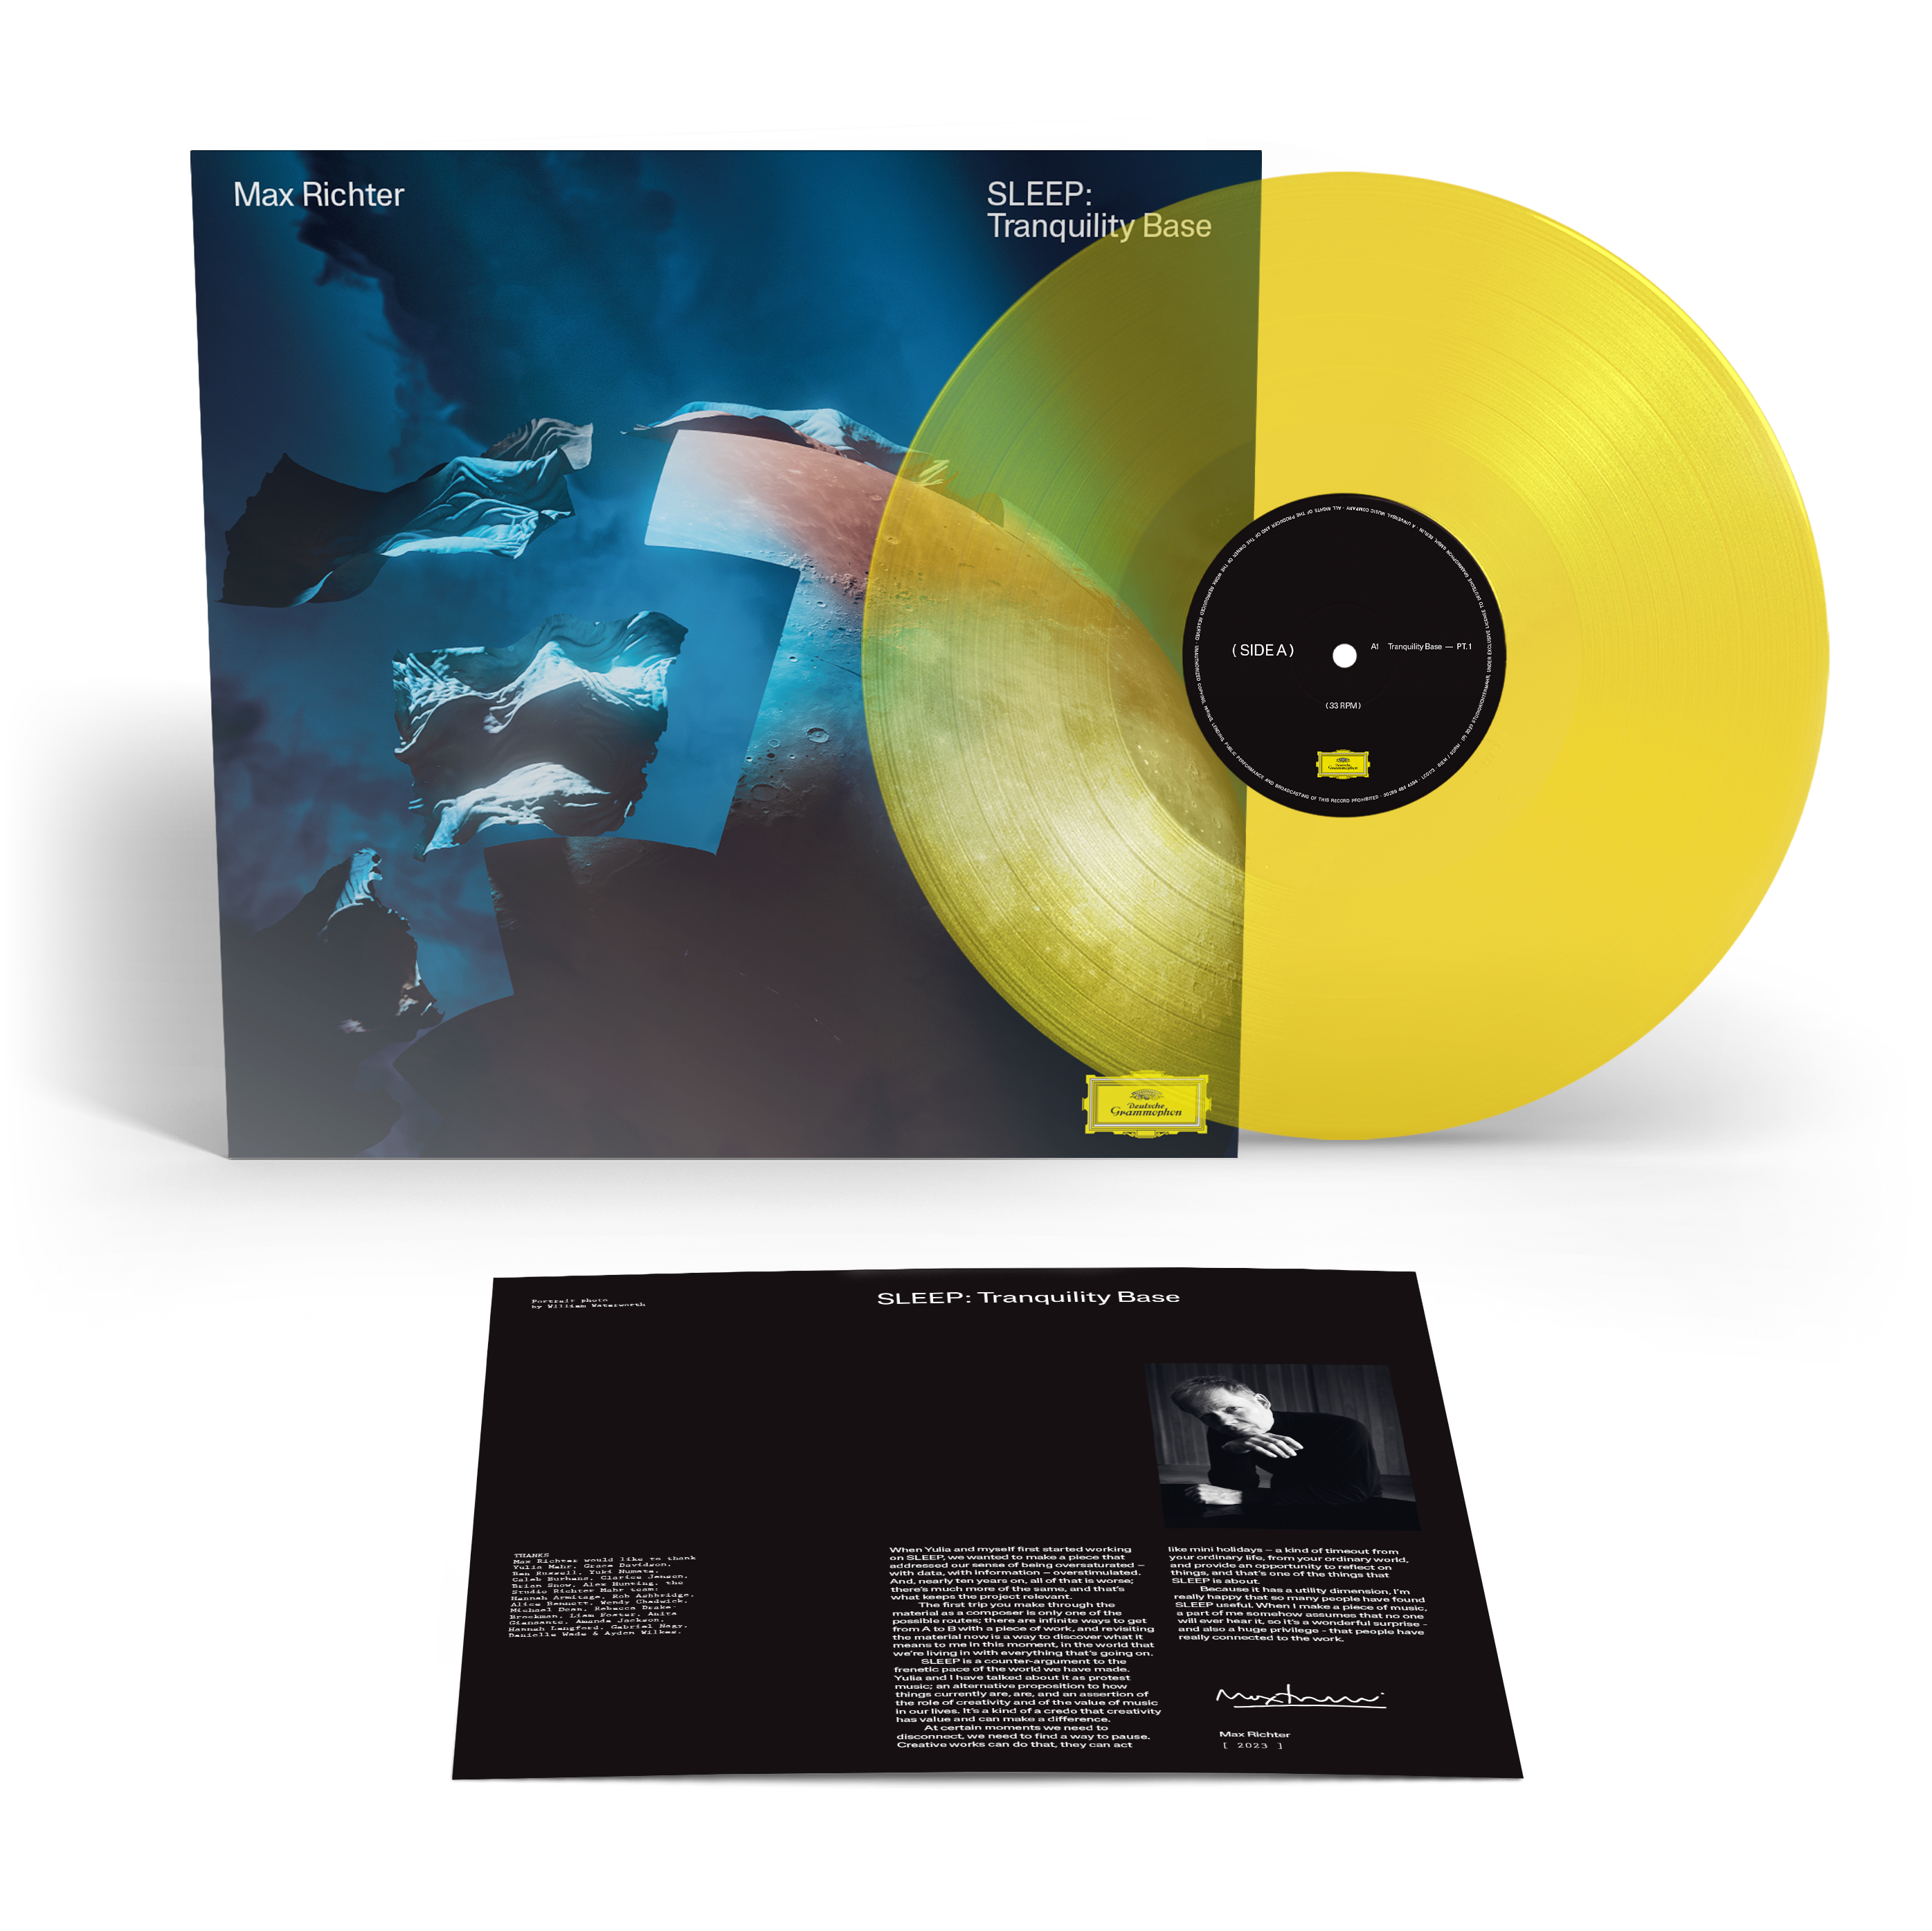 Max Richter - SLEEP: Tranquility Base  (Exclusive Yellow Vinyl)